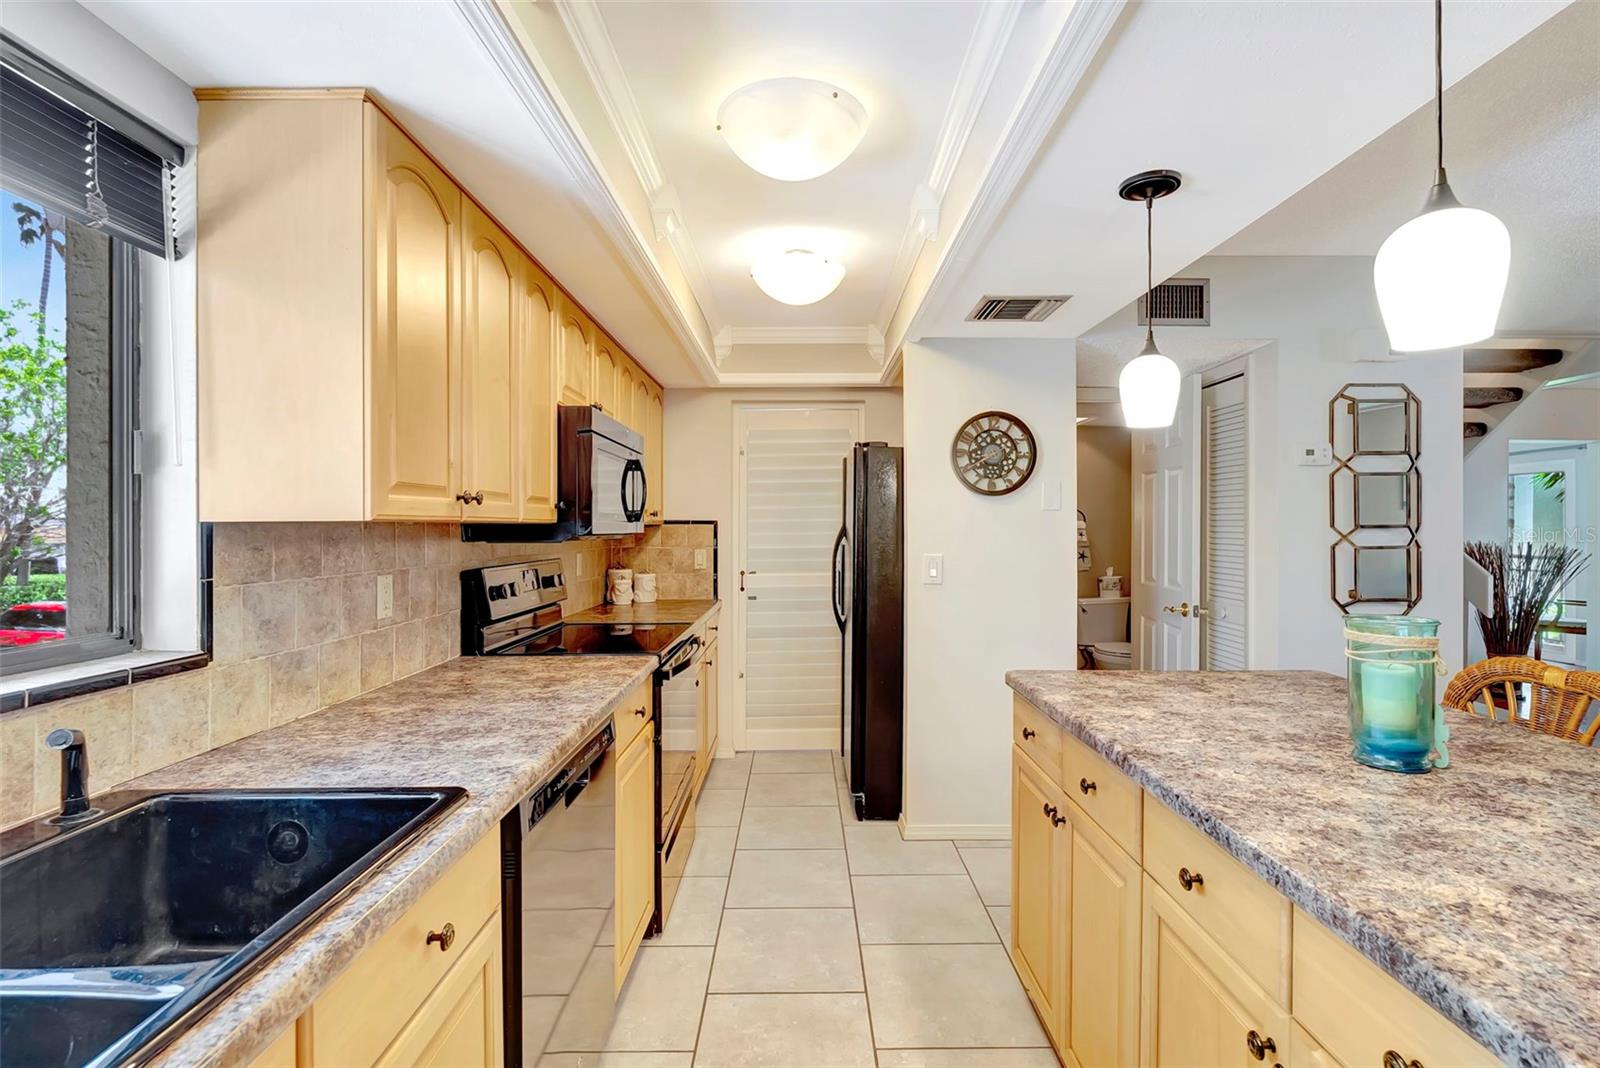 The Laundry room is right off the kitchen behind closed doors and the 1.2 bath is to the right for convenience.